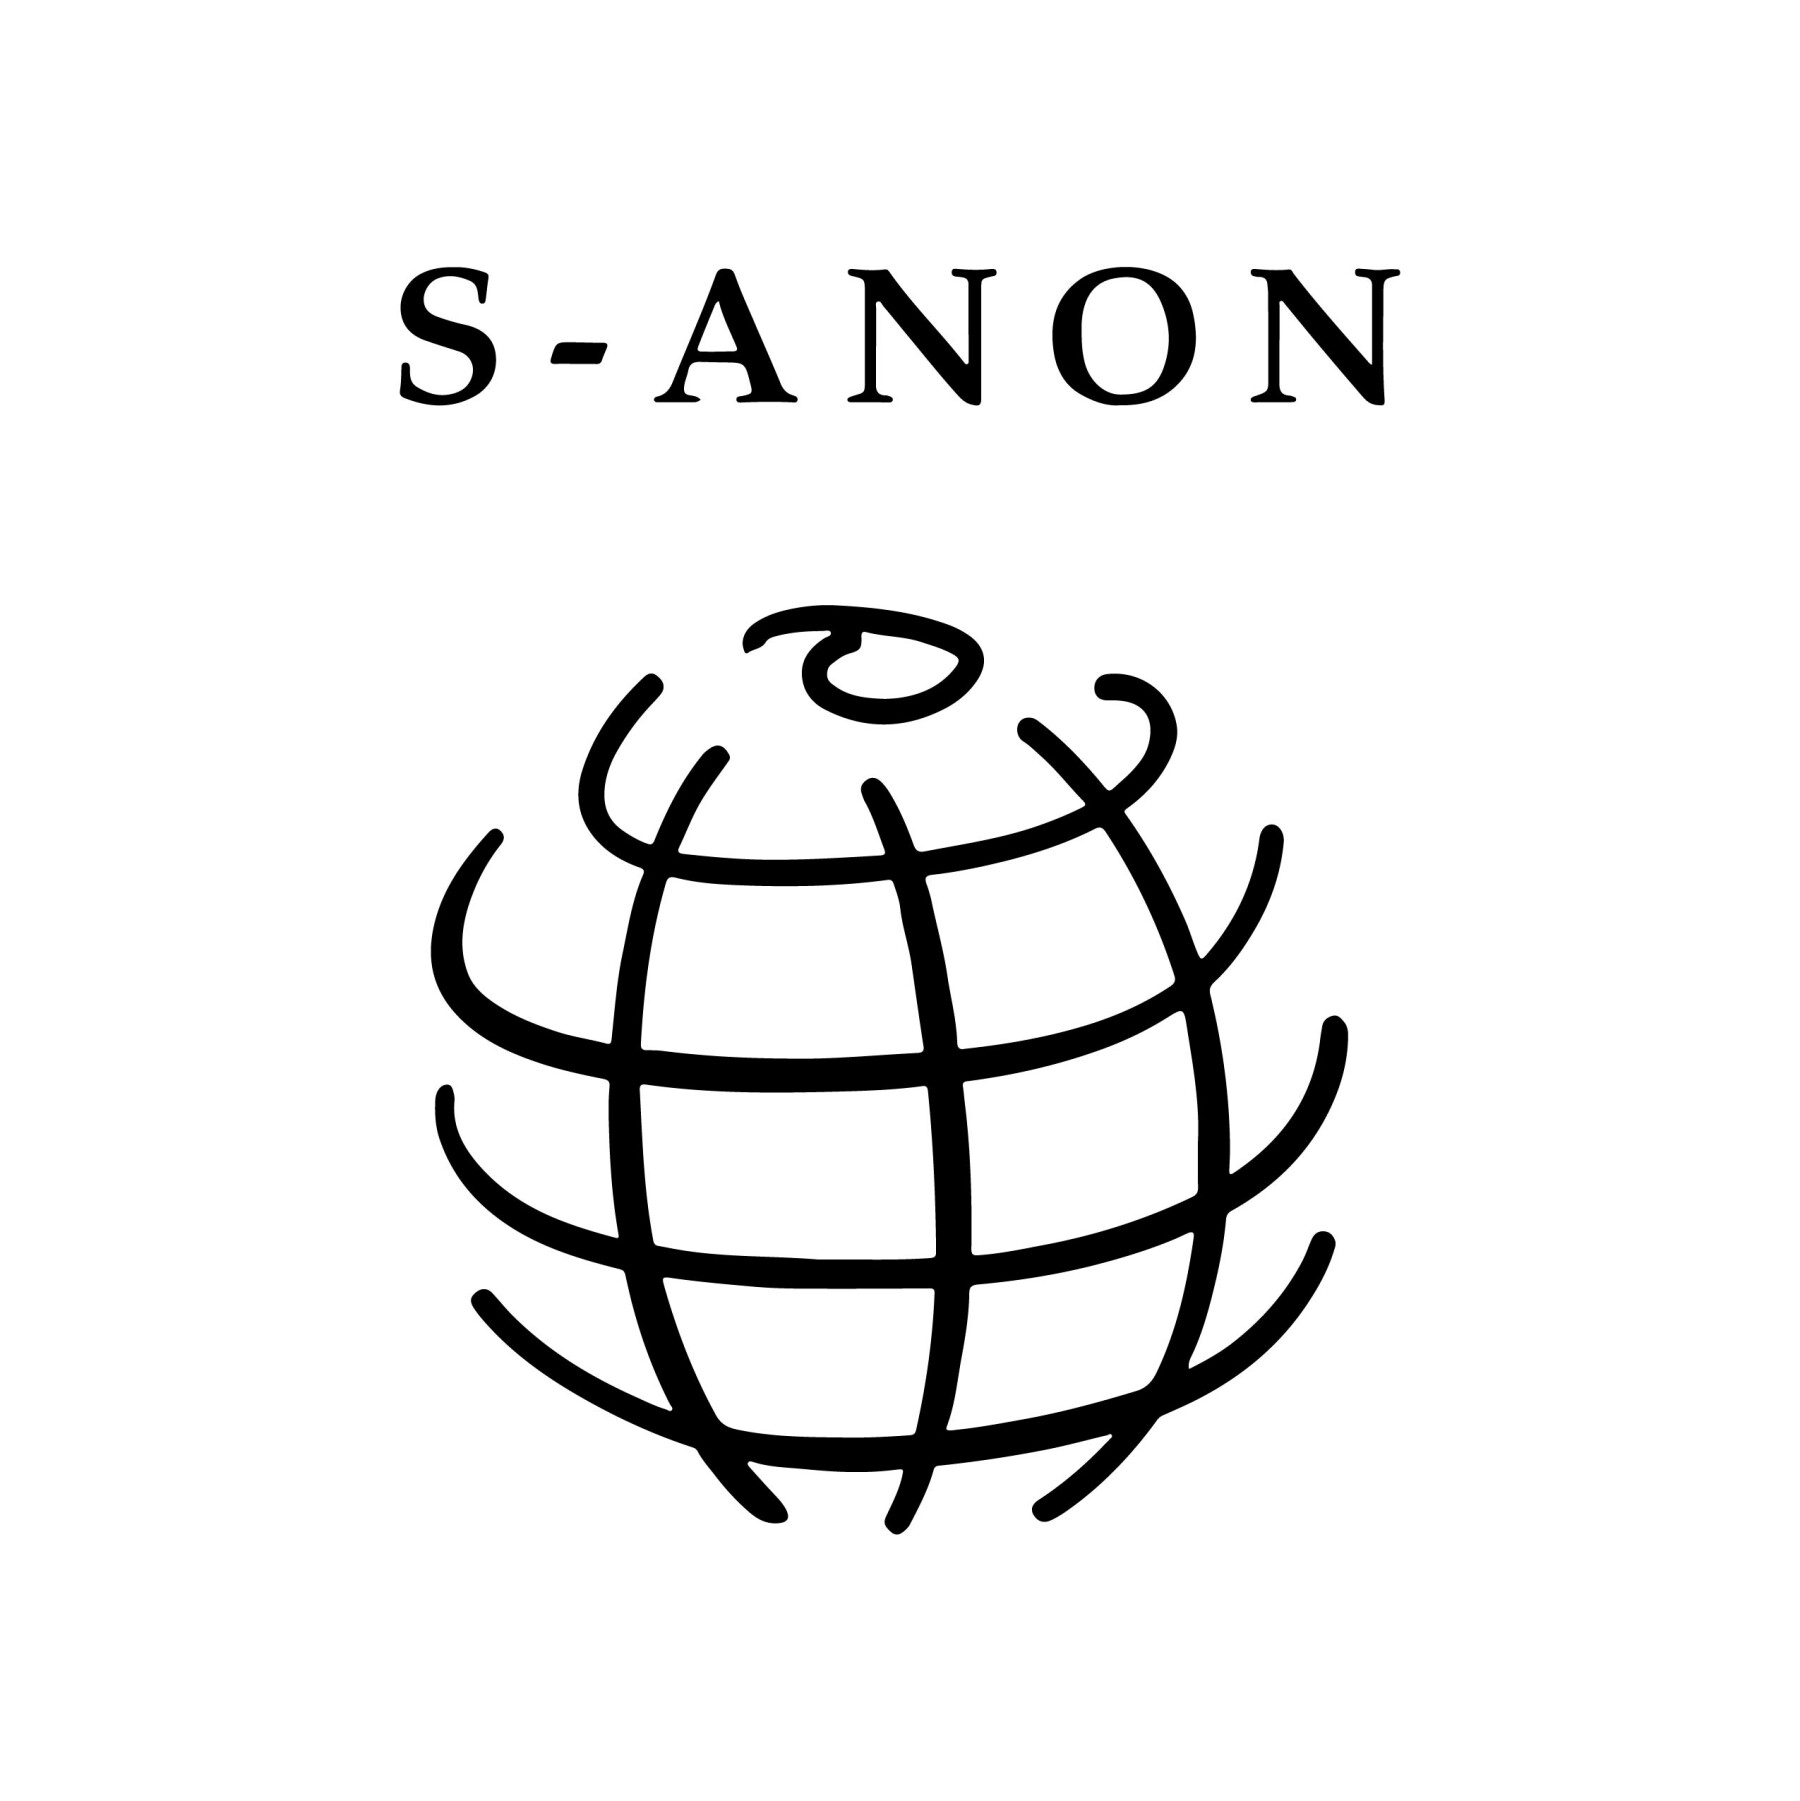 S-anon Group